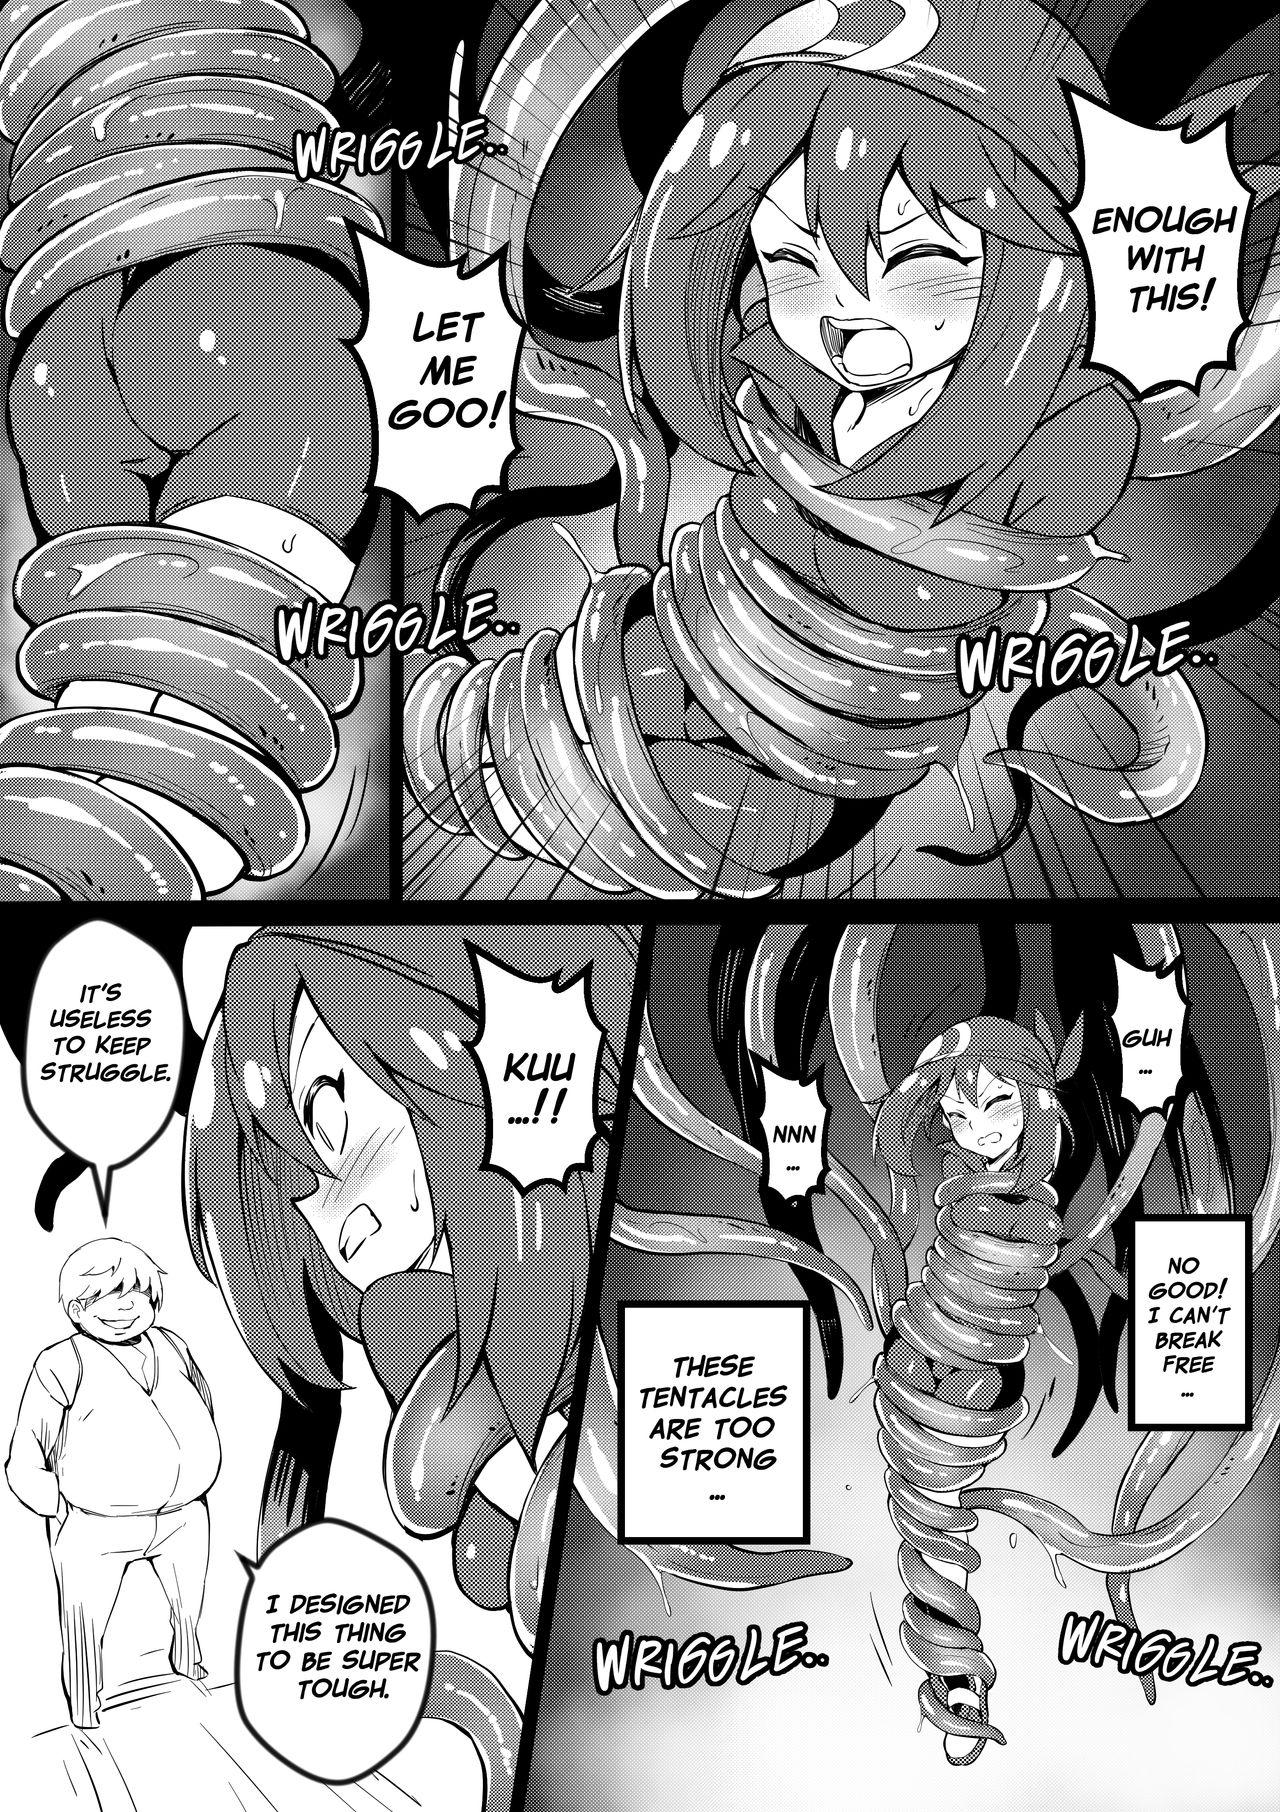 Gay Medical Poke Hell Monsters (Haruka) by Arniro111 - Pokemon Missionary Porn - Page 8